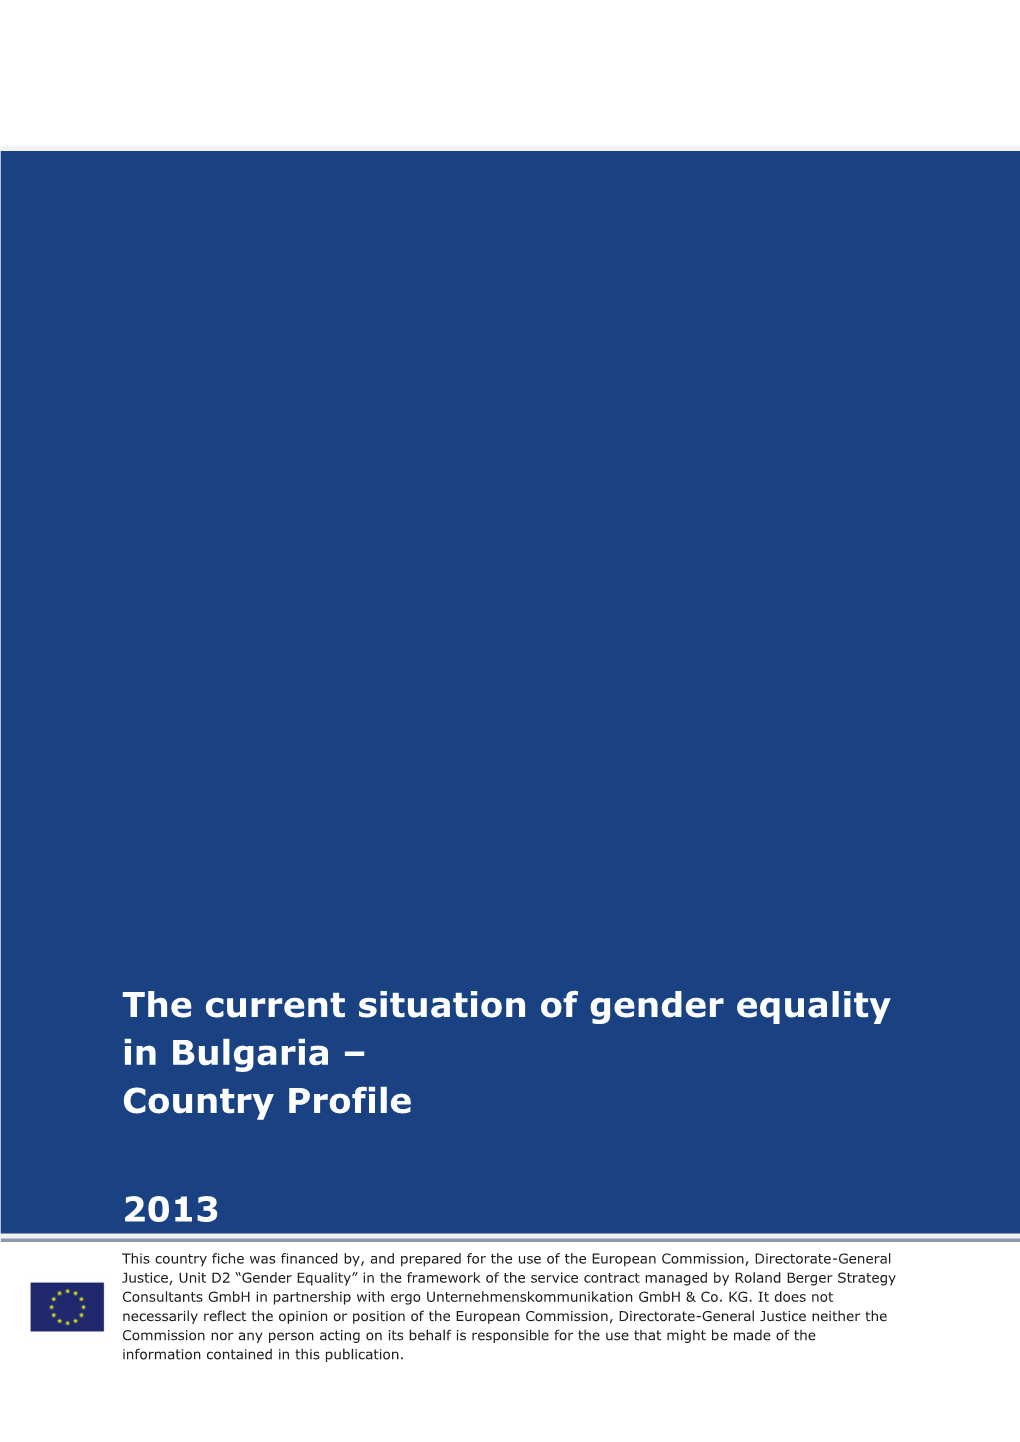 The Current Situation of Gender Equality in Bulgaria – Country Profile